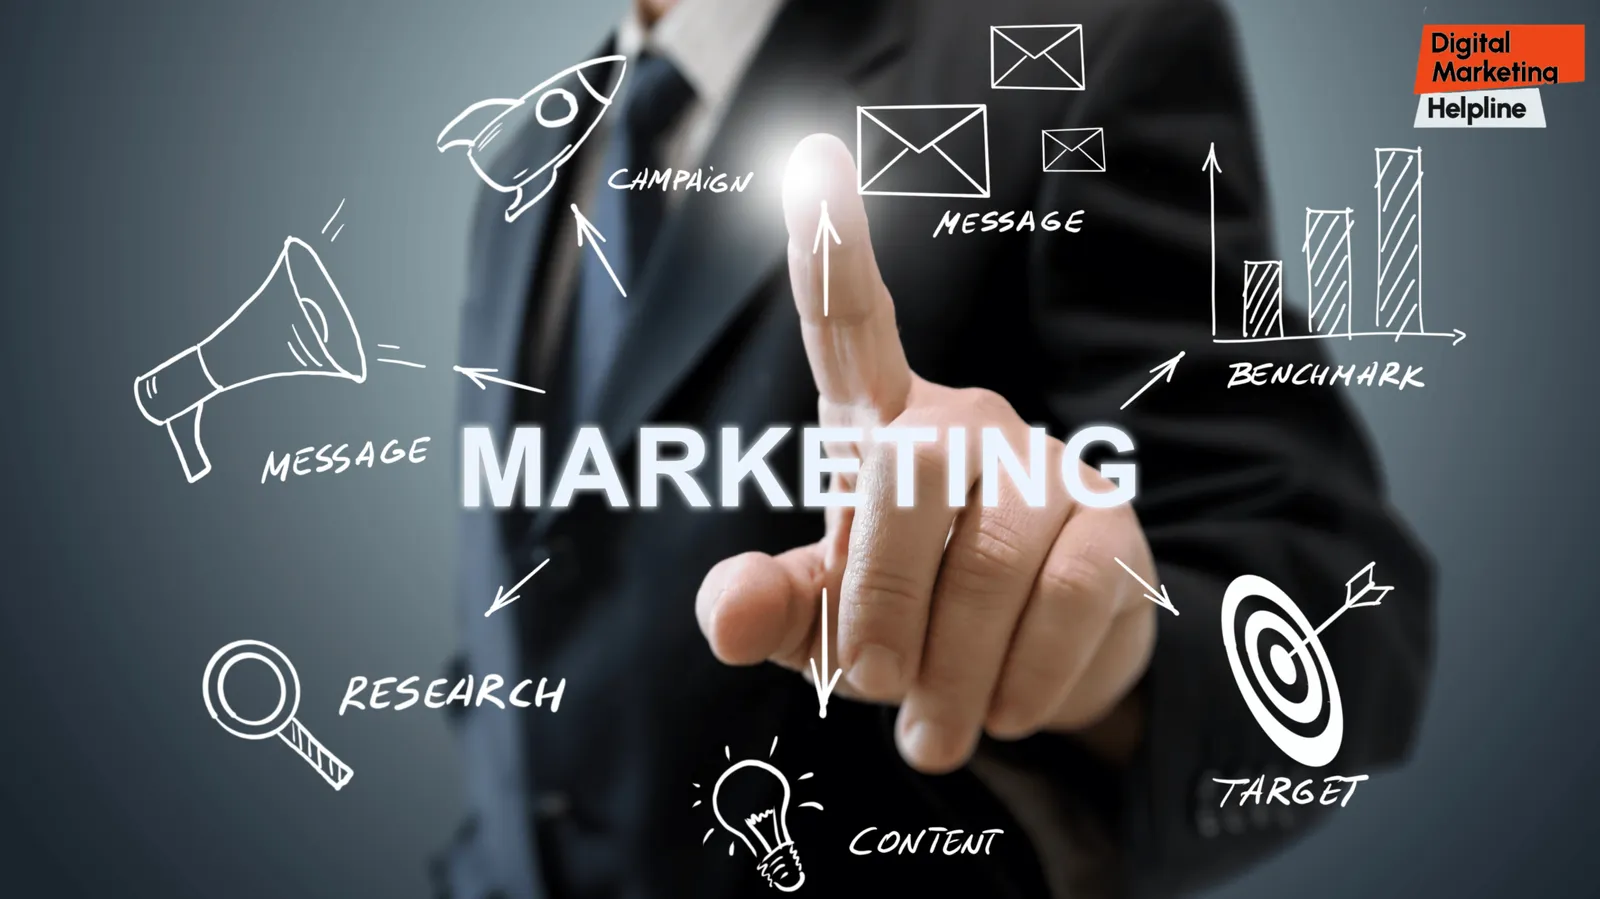 multi-channel marketing strategies for new businesses in digital marketing